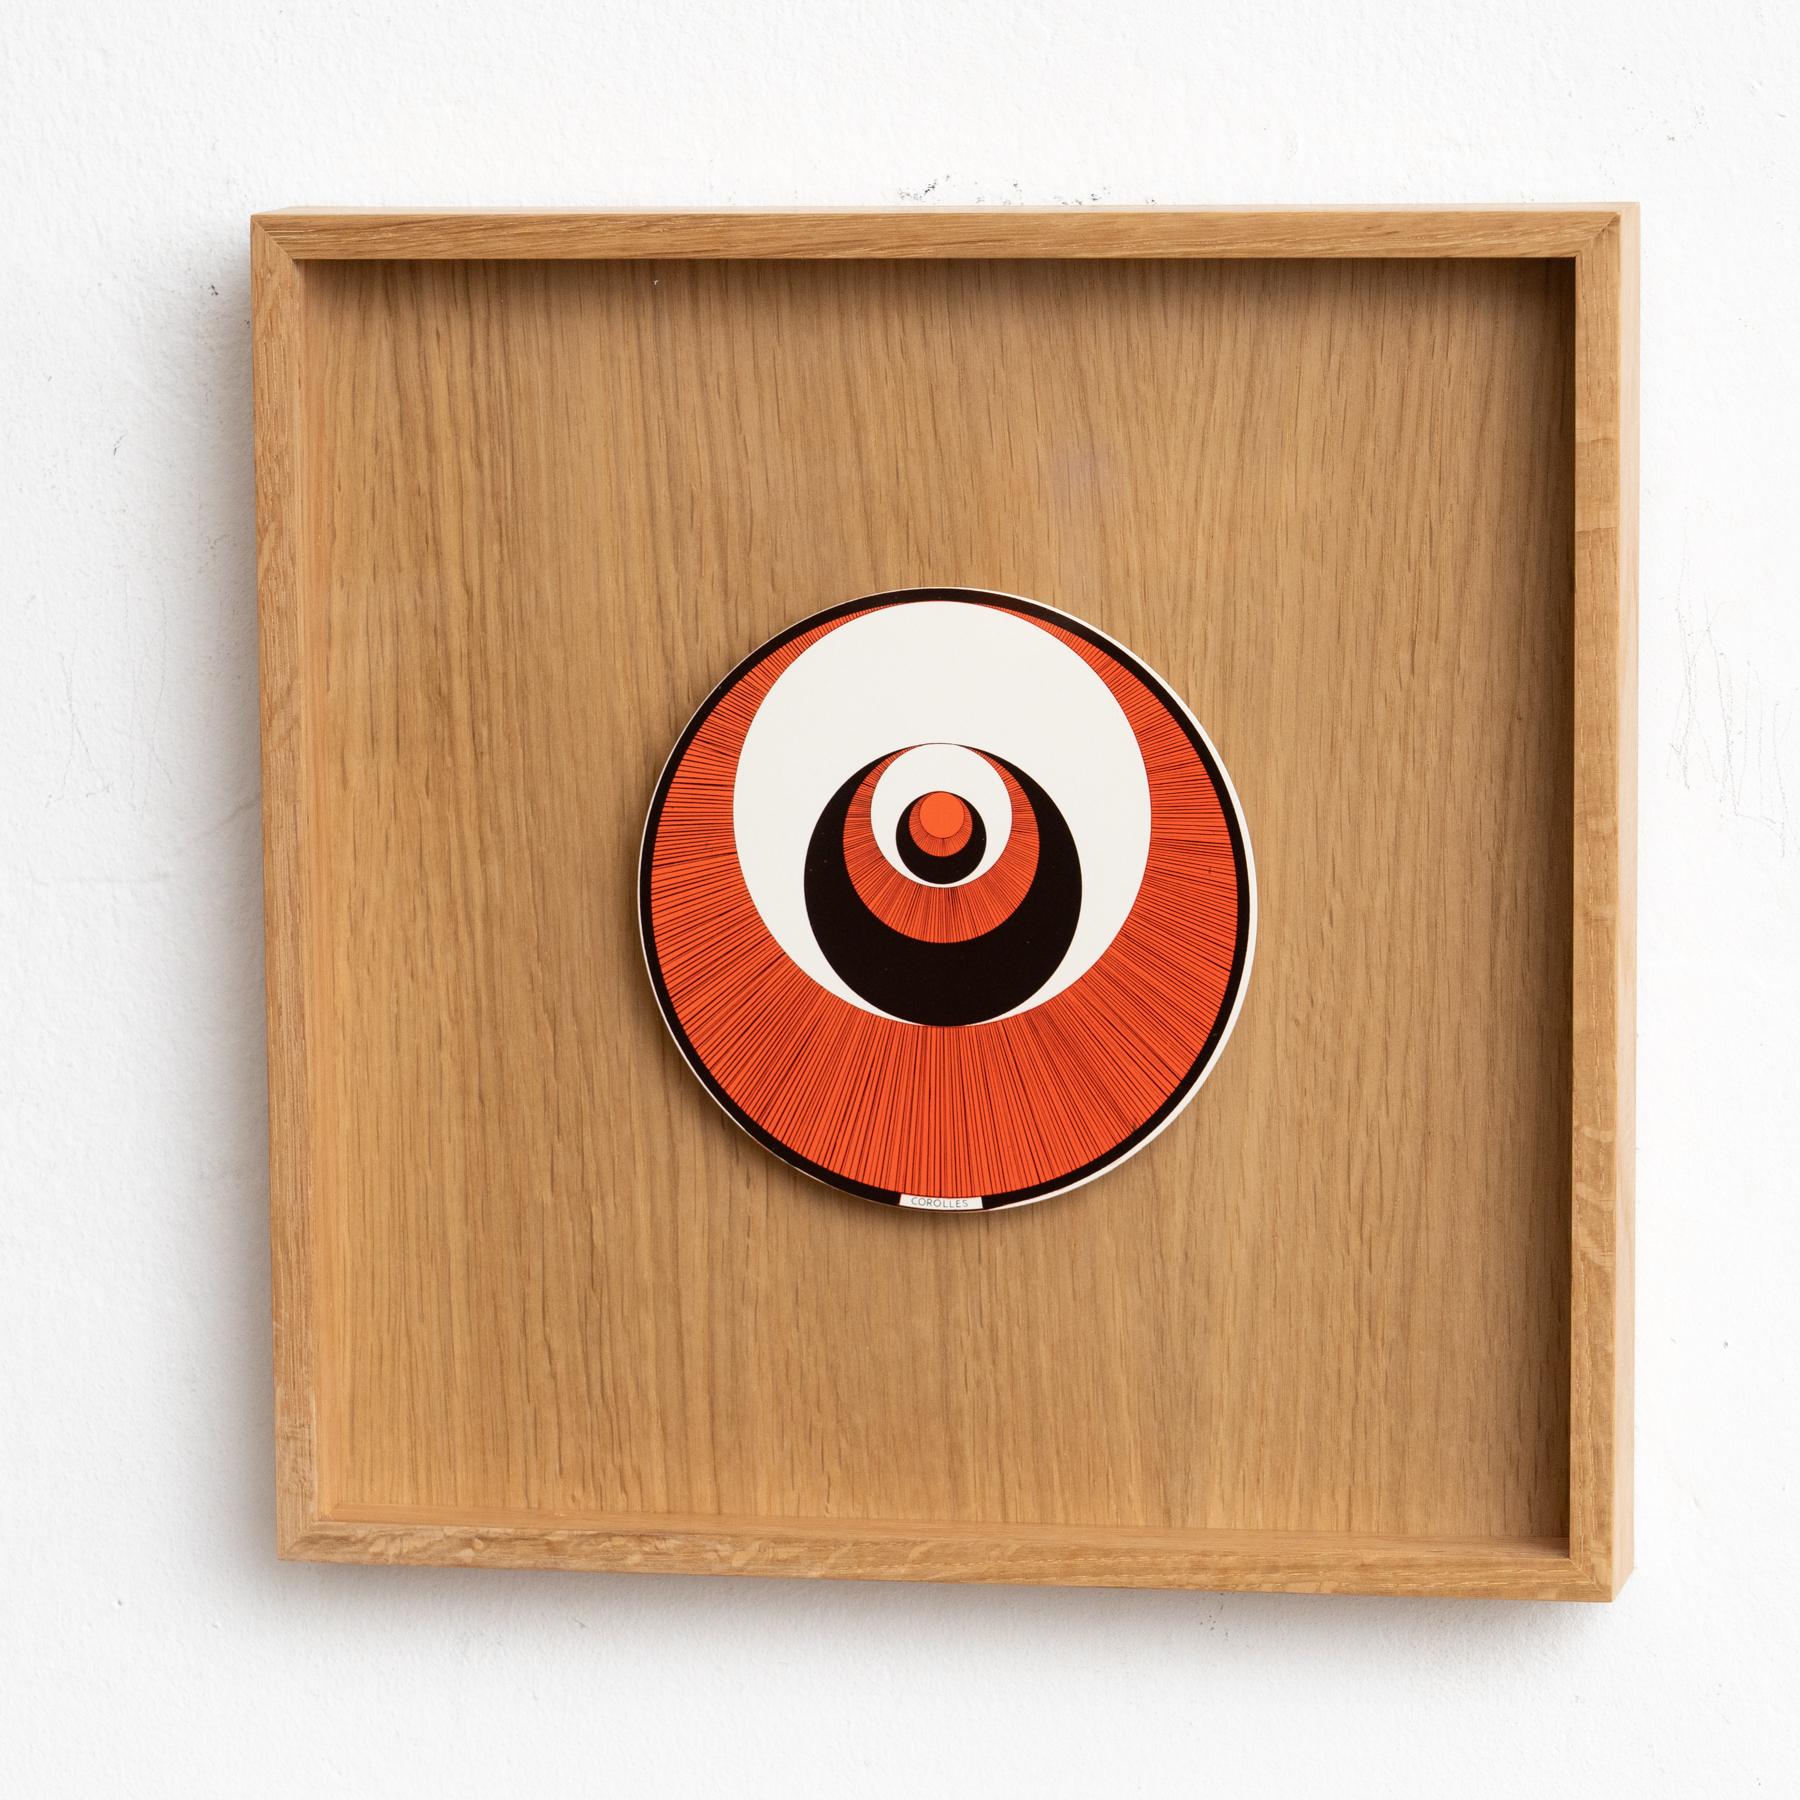 Paper Marcel Duchamp Red Black and White Corolles Rotorelief by Konig Series 133, 1987 For Sale